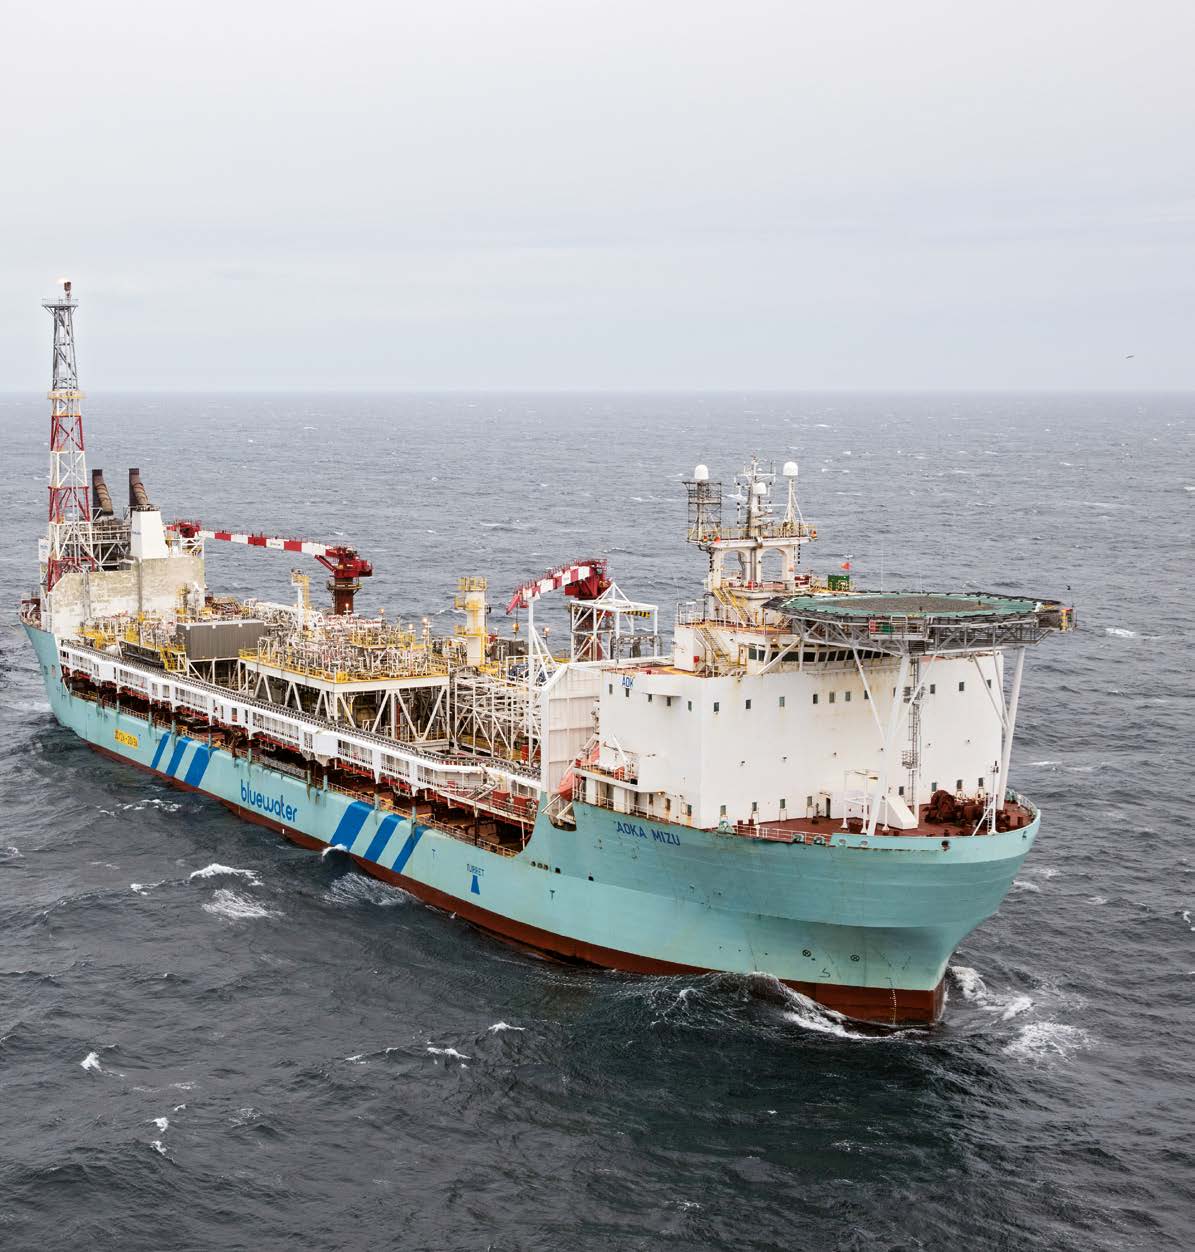 Aoka Mizu FPSO is operating on the Lancaster field for Hurricane